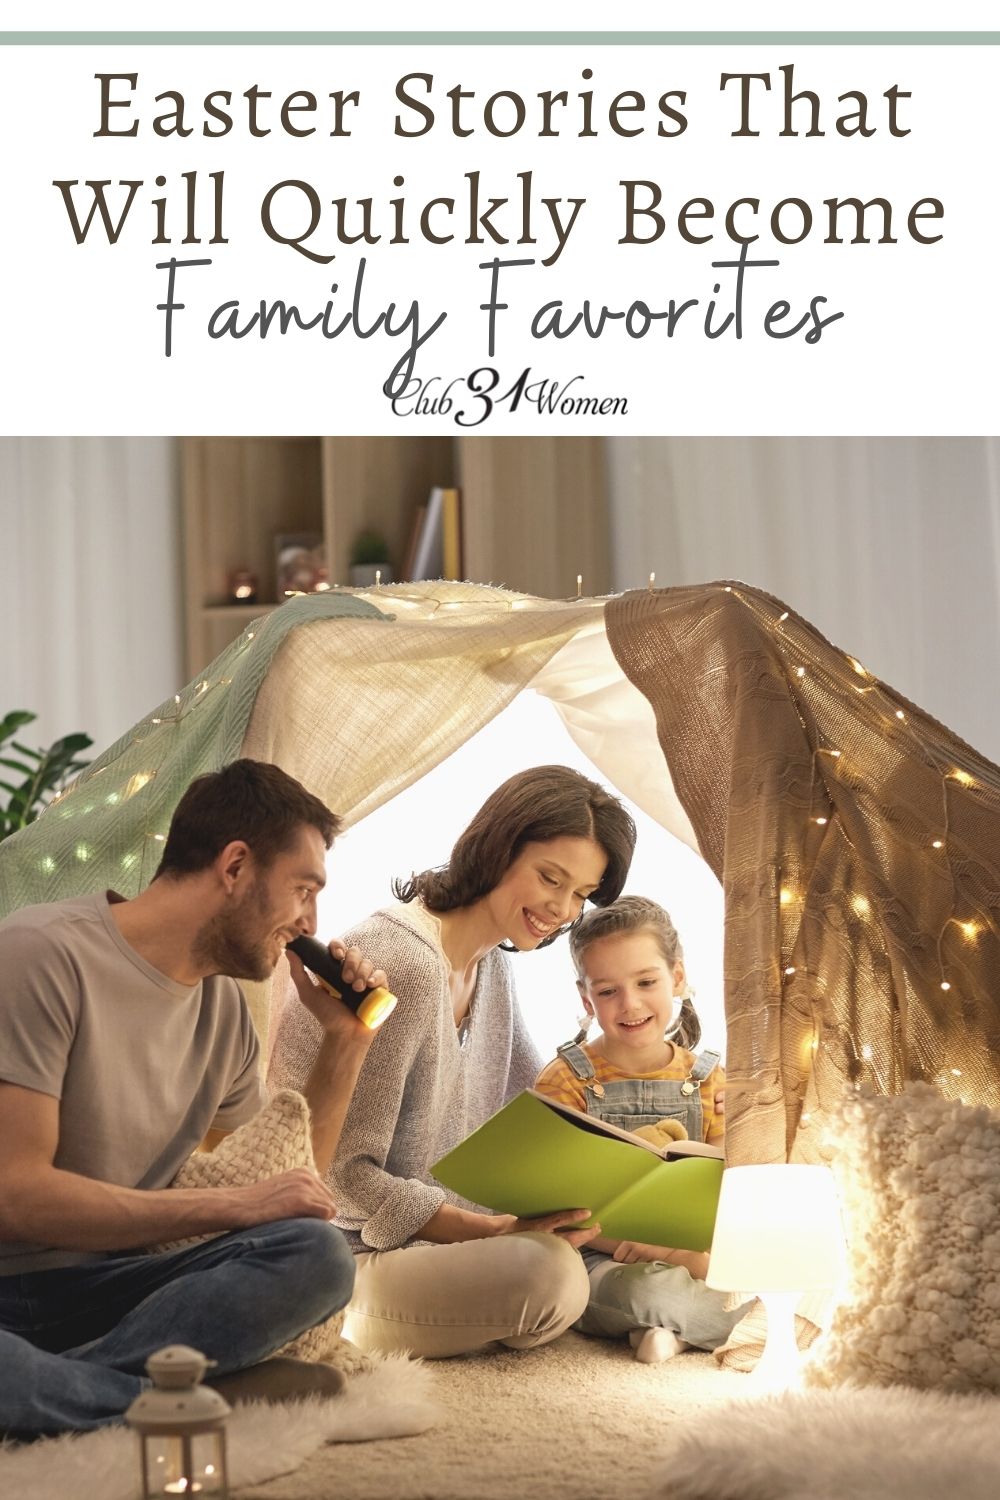 If you're looking for some excellent Easter stories to share with your entire family this season, here is a list of some of our favorites! via @Club31Women